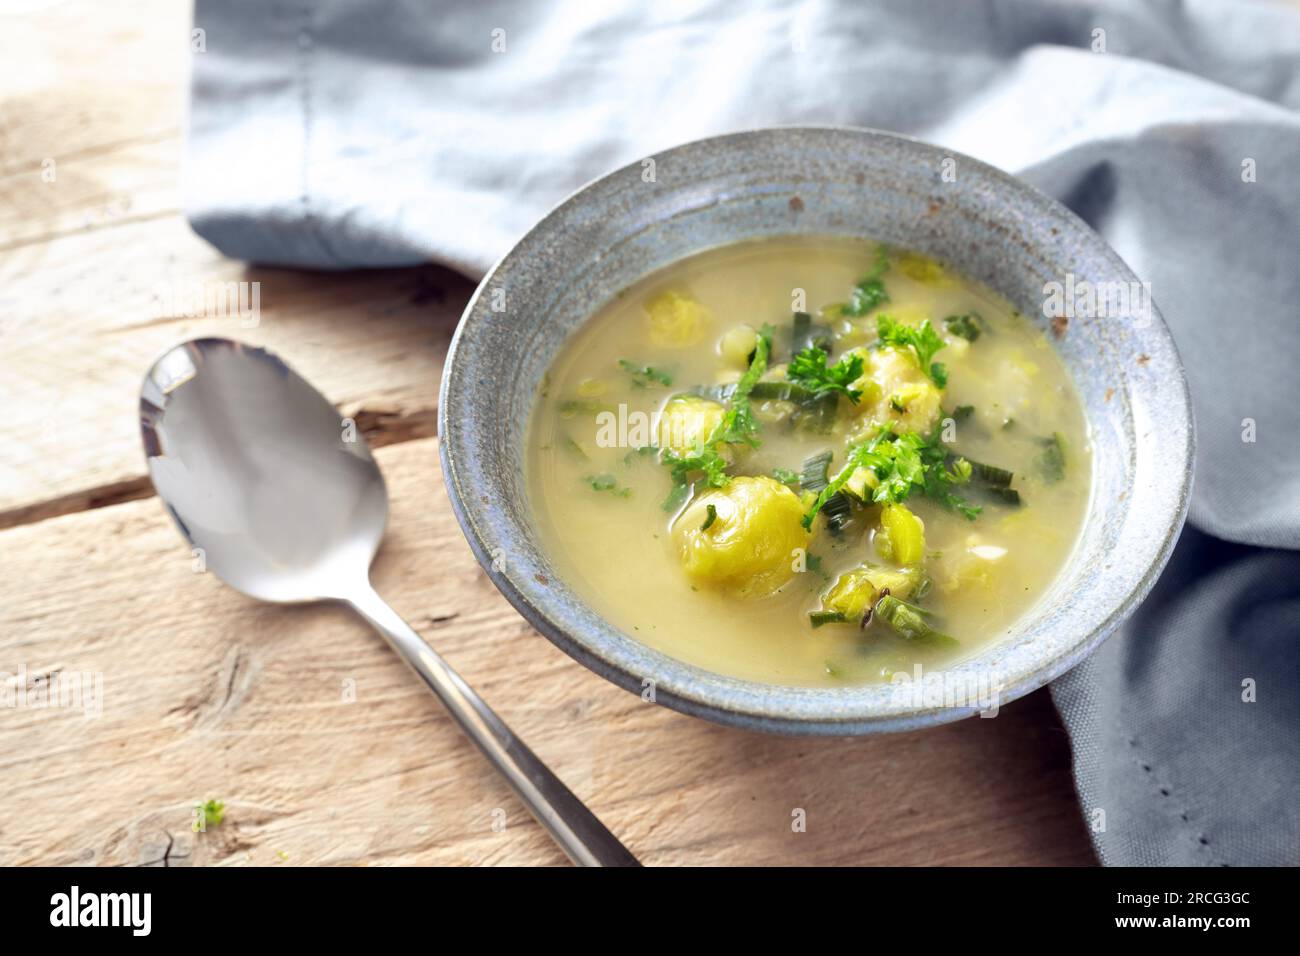 Vegetarian soup from vegetables like brussels sprout, leek and potato with parsley garnish in a blue bowl, spoon and napkin on a rustic wooden table, Stock Photo